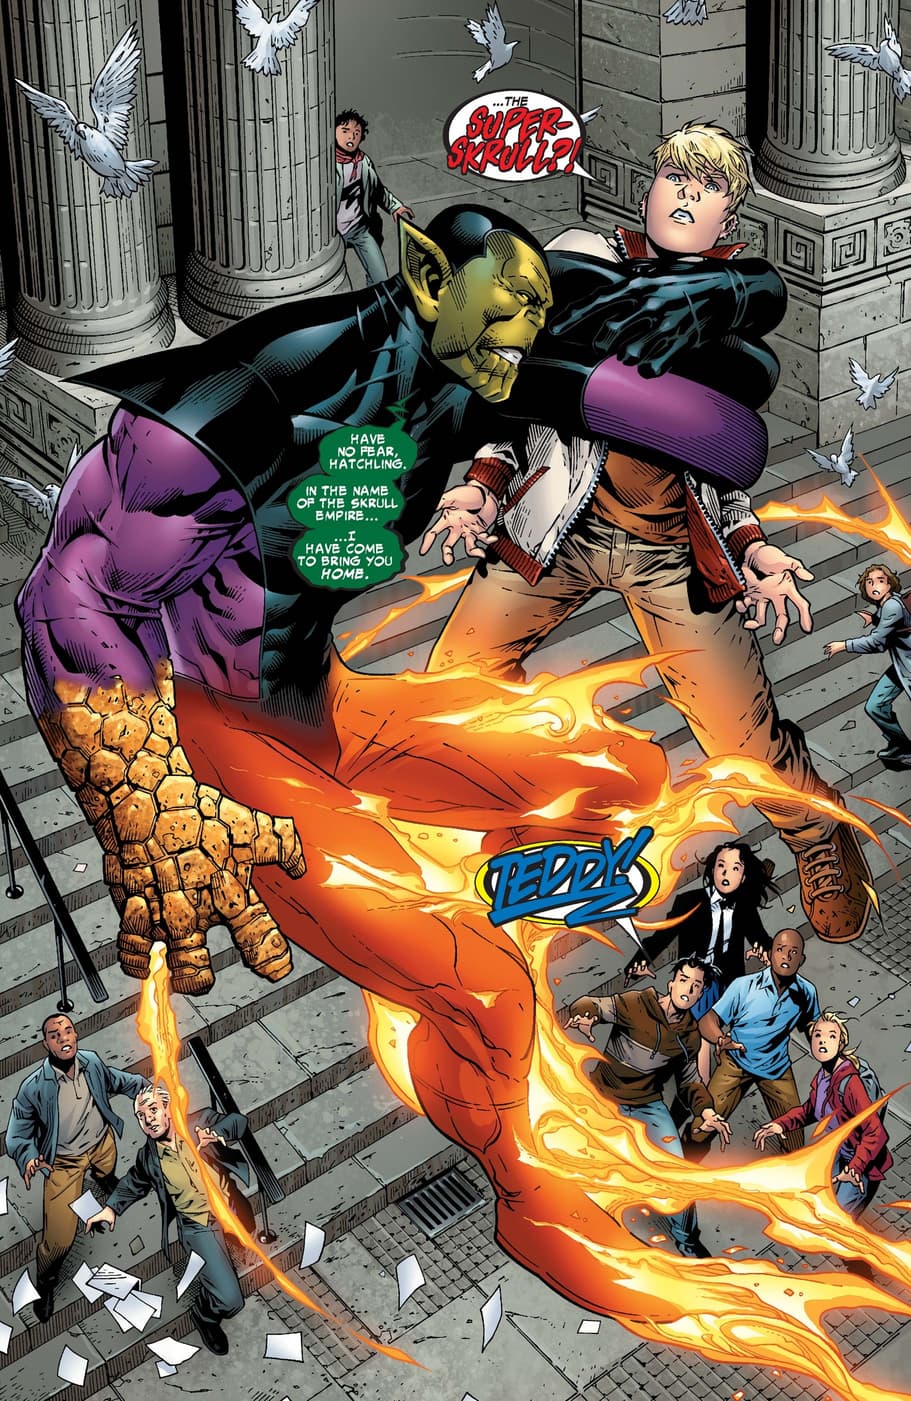 The Super-Skrull tries to bring Hulkling “home” in YOUNG AVENGERS (2005) #9.